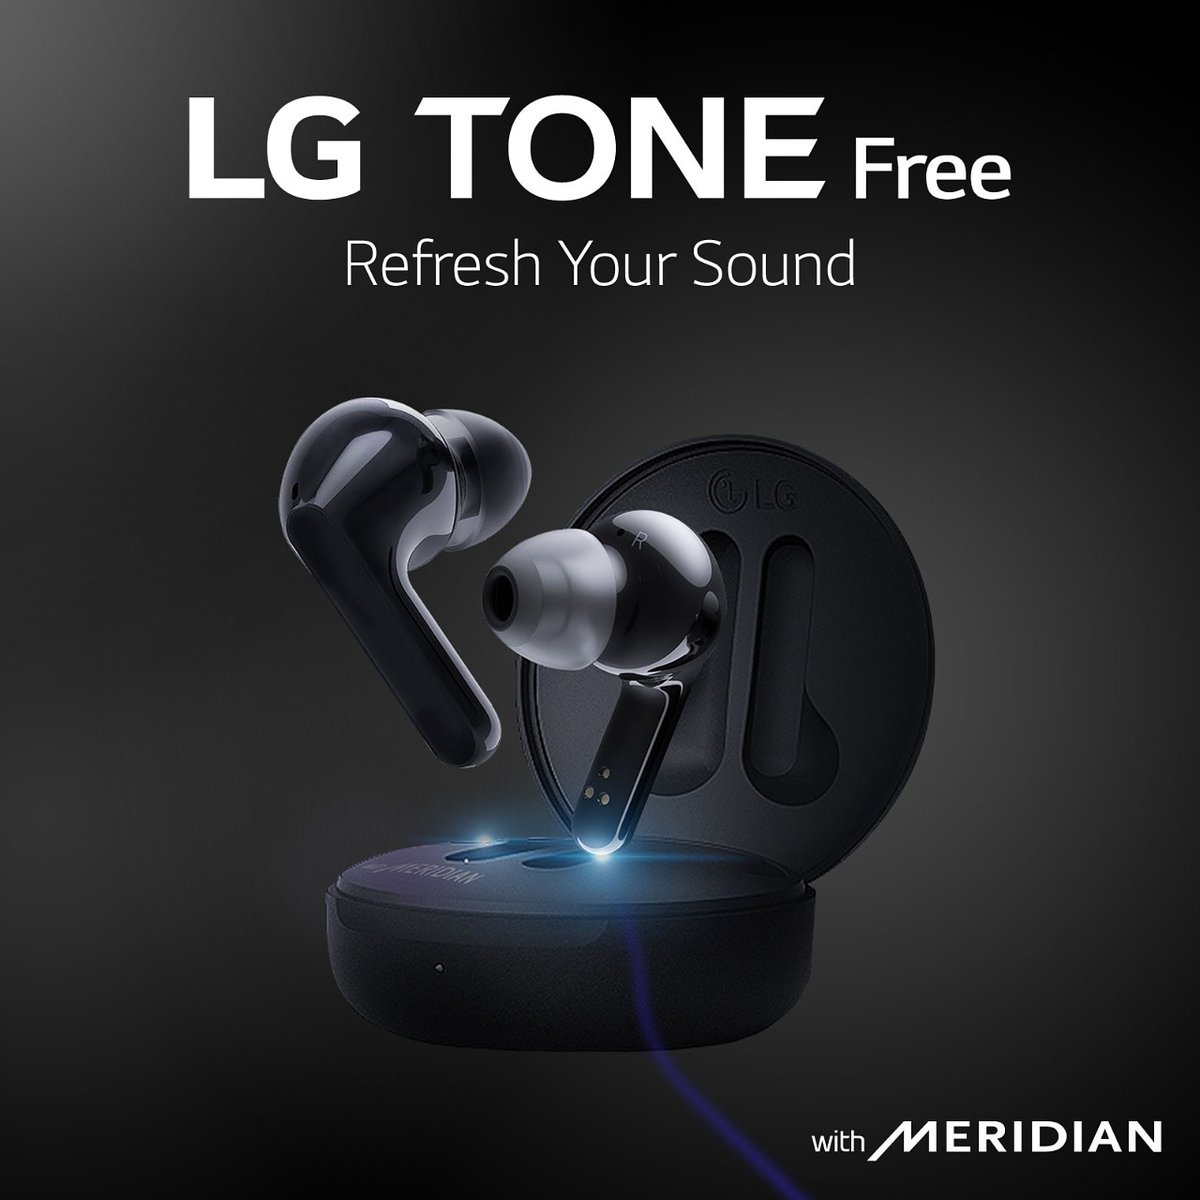 Best ear buds in the market🎧...they are affordable  and they have amazing sound clarity🔊🔊 . Check them out bit.ly/2QJs2V4 #LGTONEFree  #LG100Club